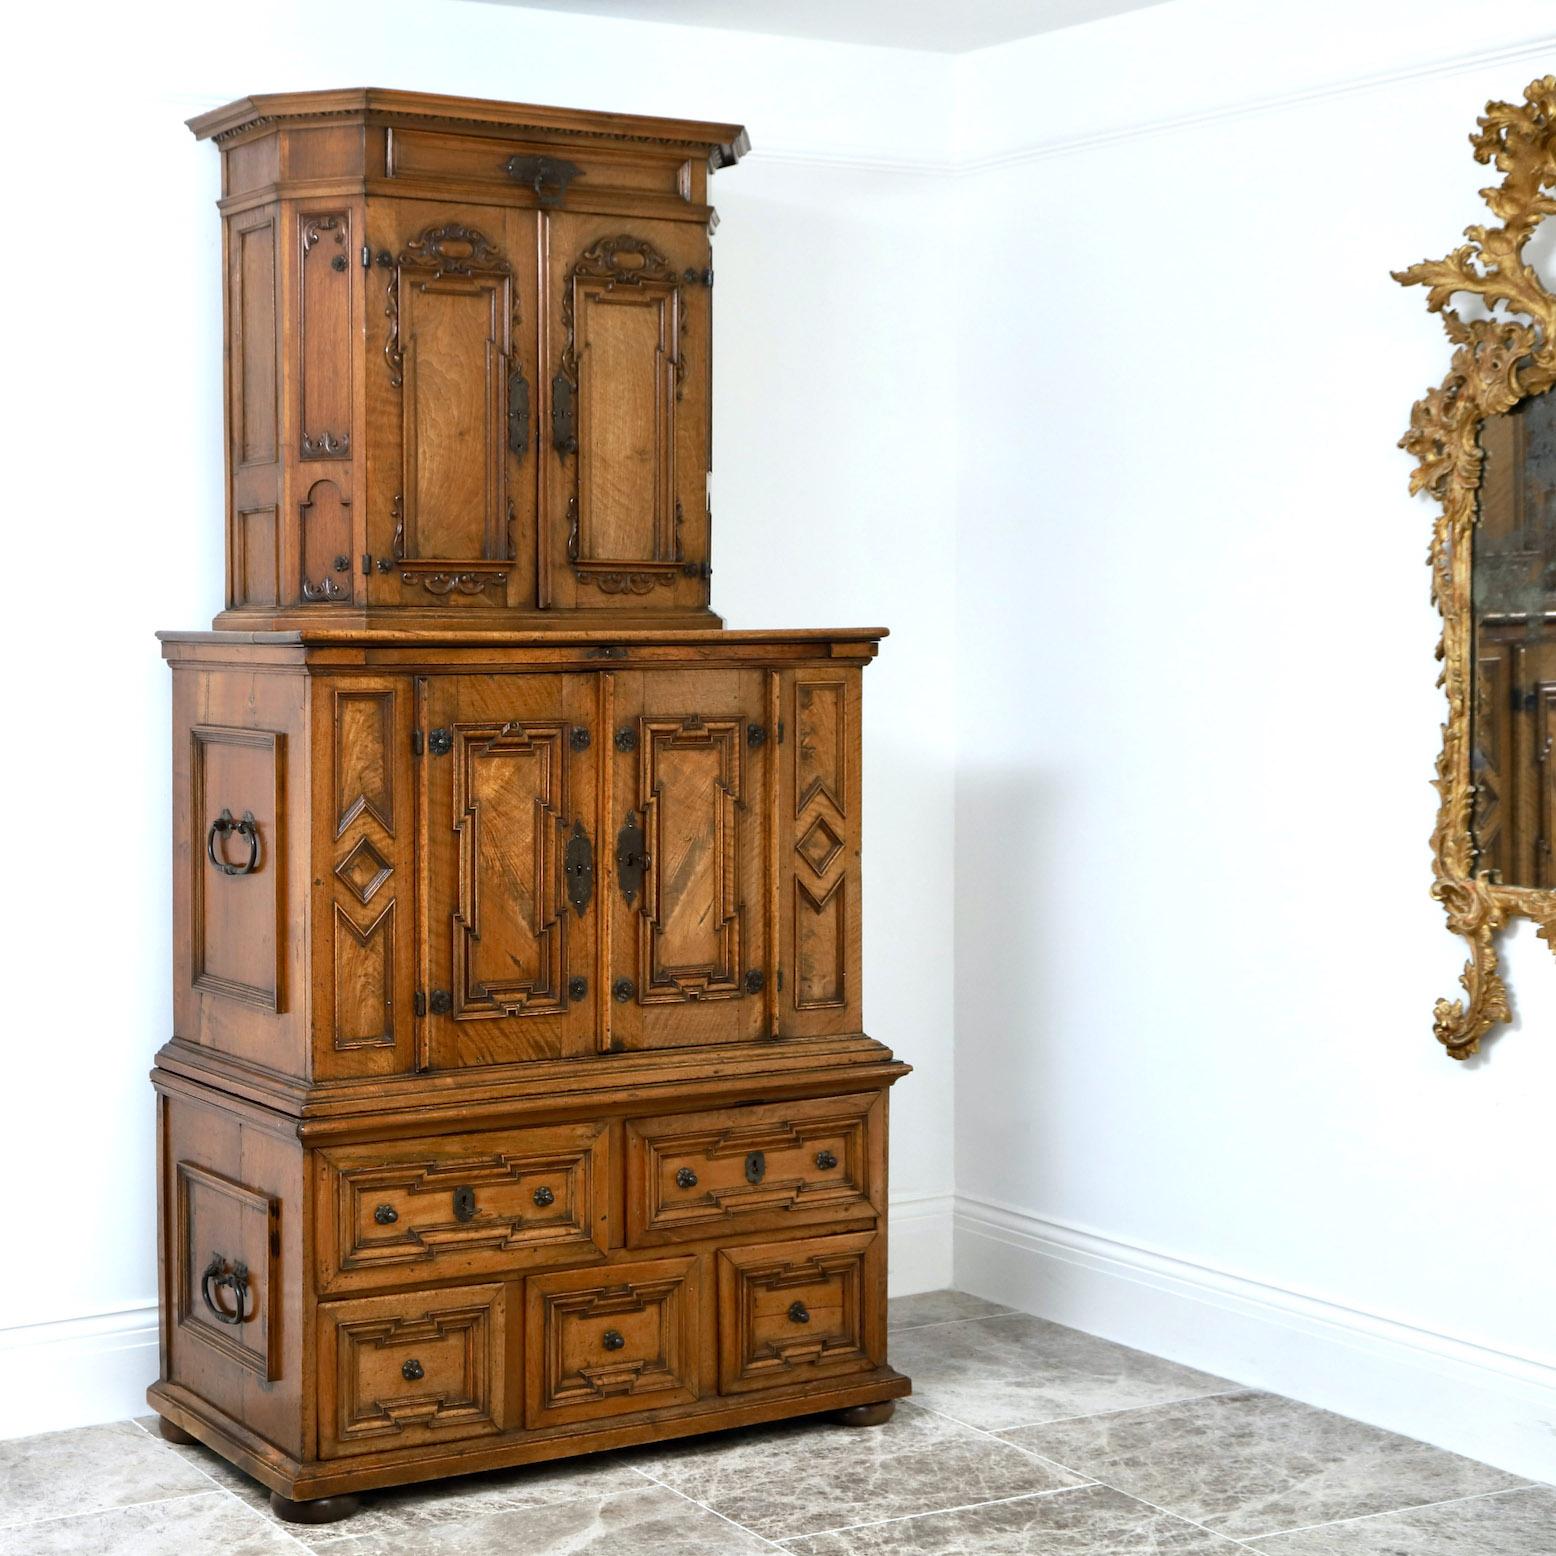 An 18th Century Baroque Stacking Cabinet In Good Condition For Sale In Petworth, GB